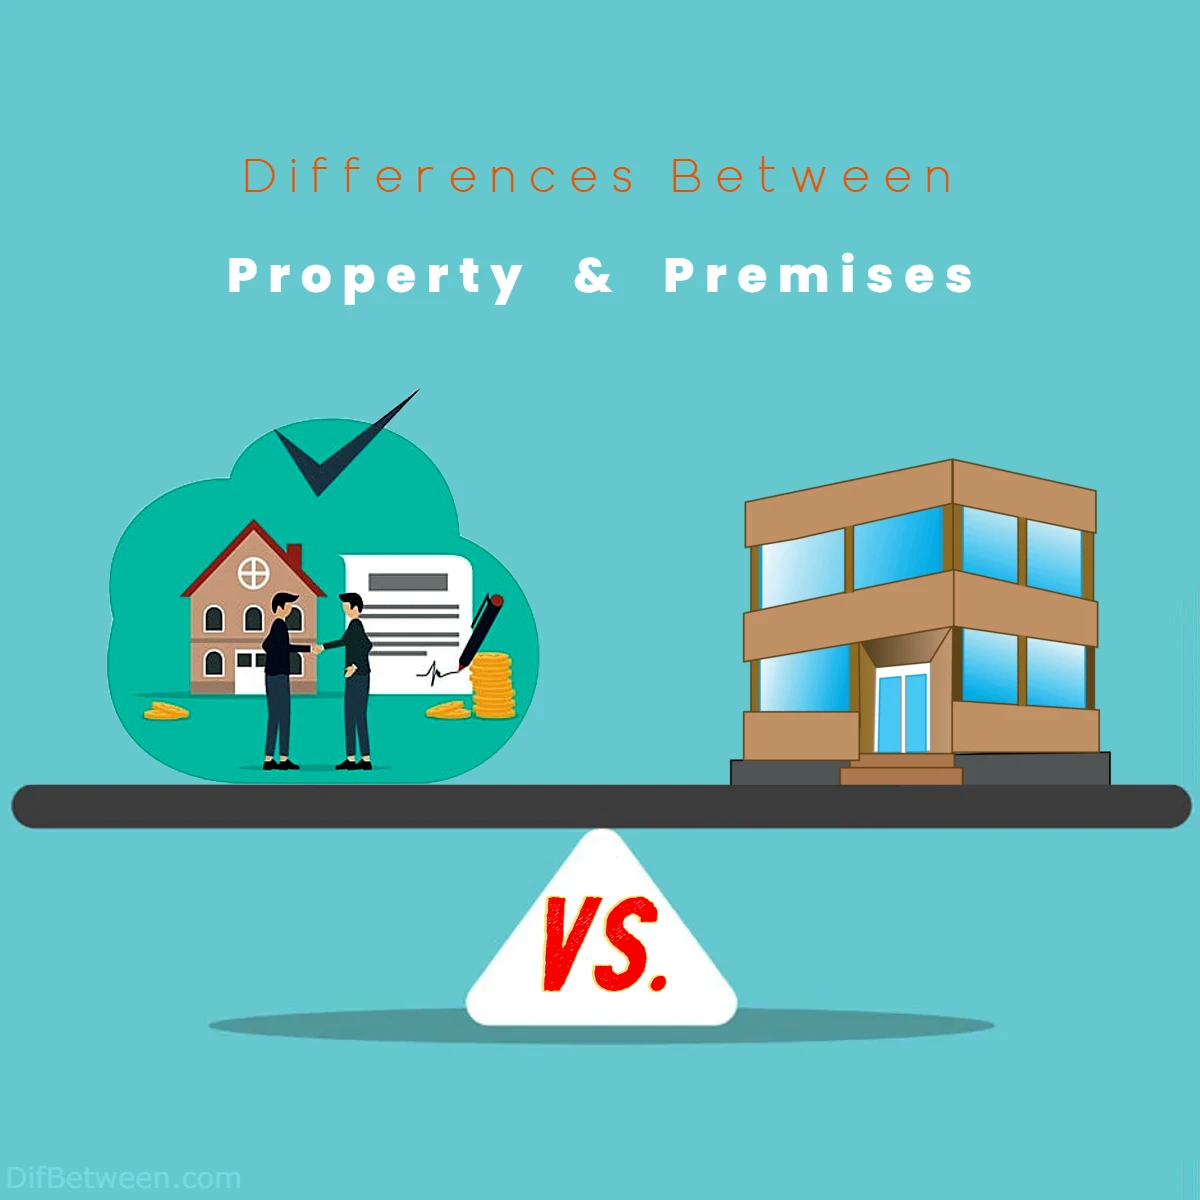 Differences Between Property vs Premises